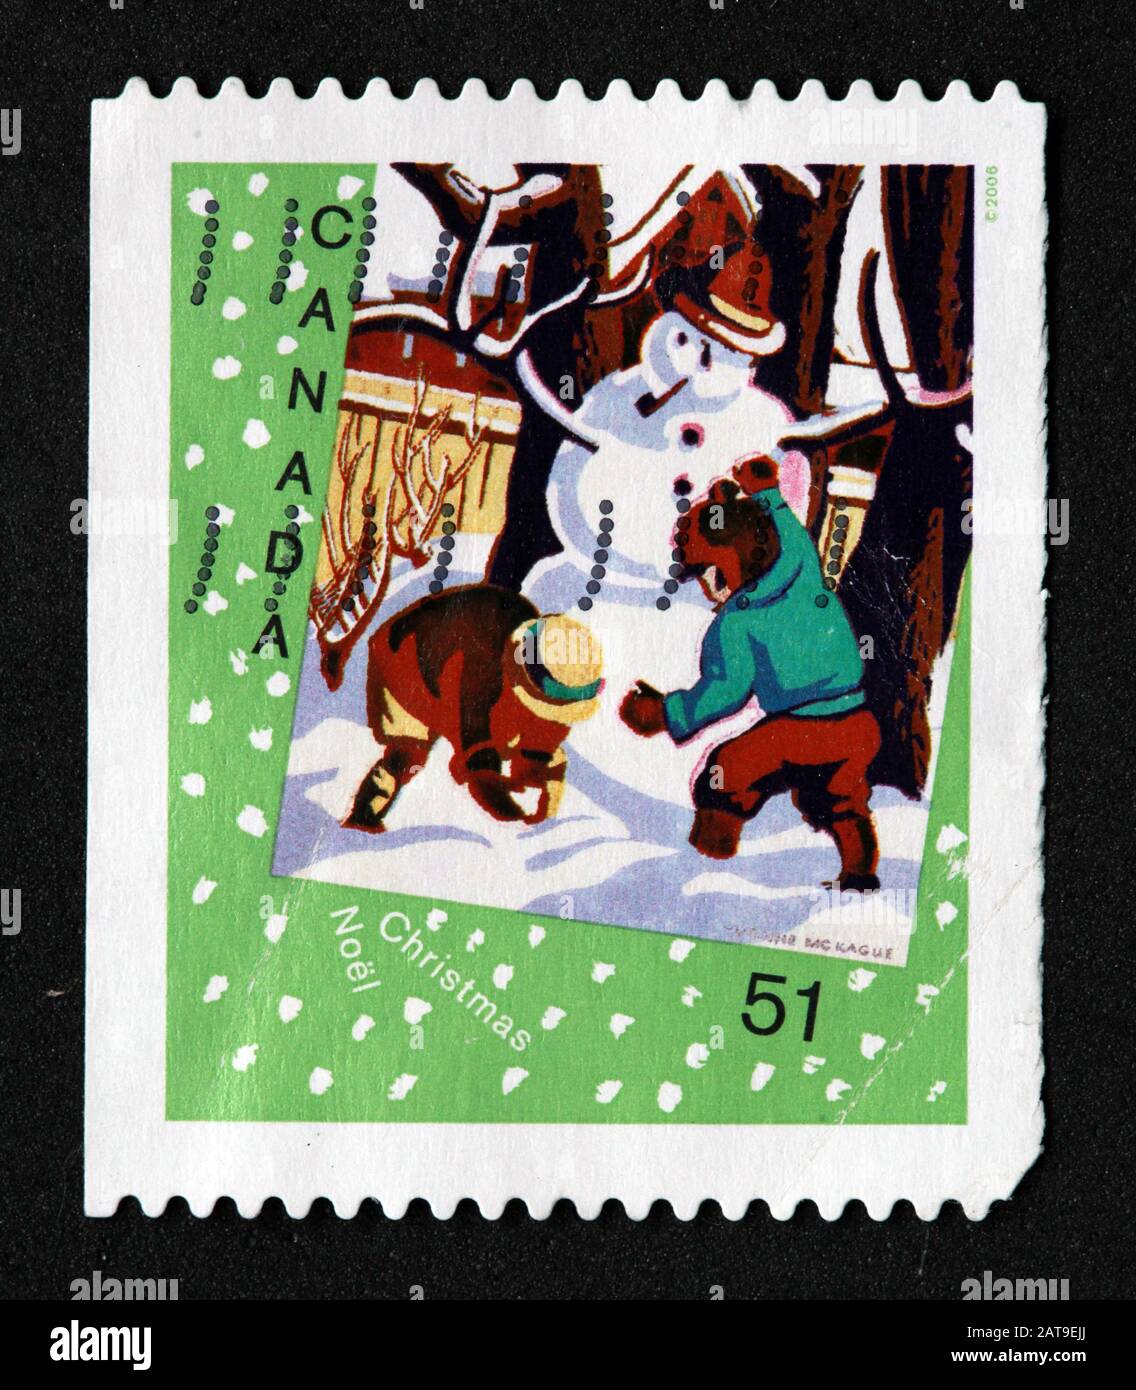 Canadian Stamp, Canada Stamp, Canada Post, usato Stamp, pupazzo di neve, 51c 51cent, Noel, Natale Foto Stock